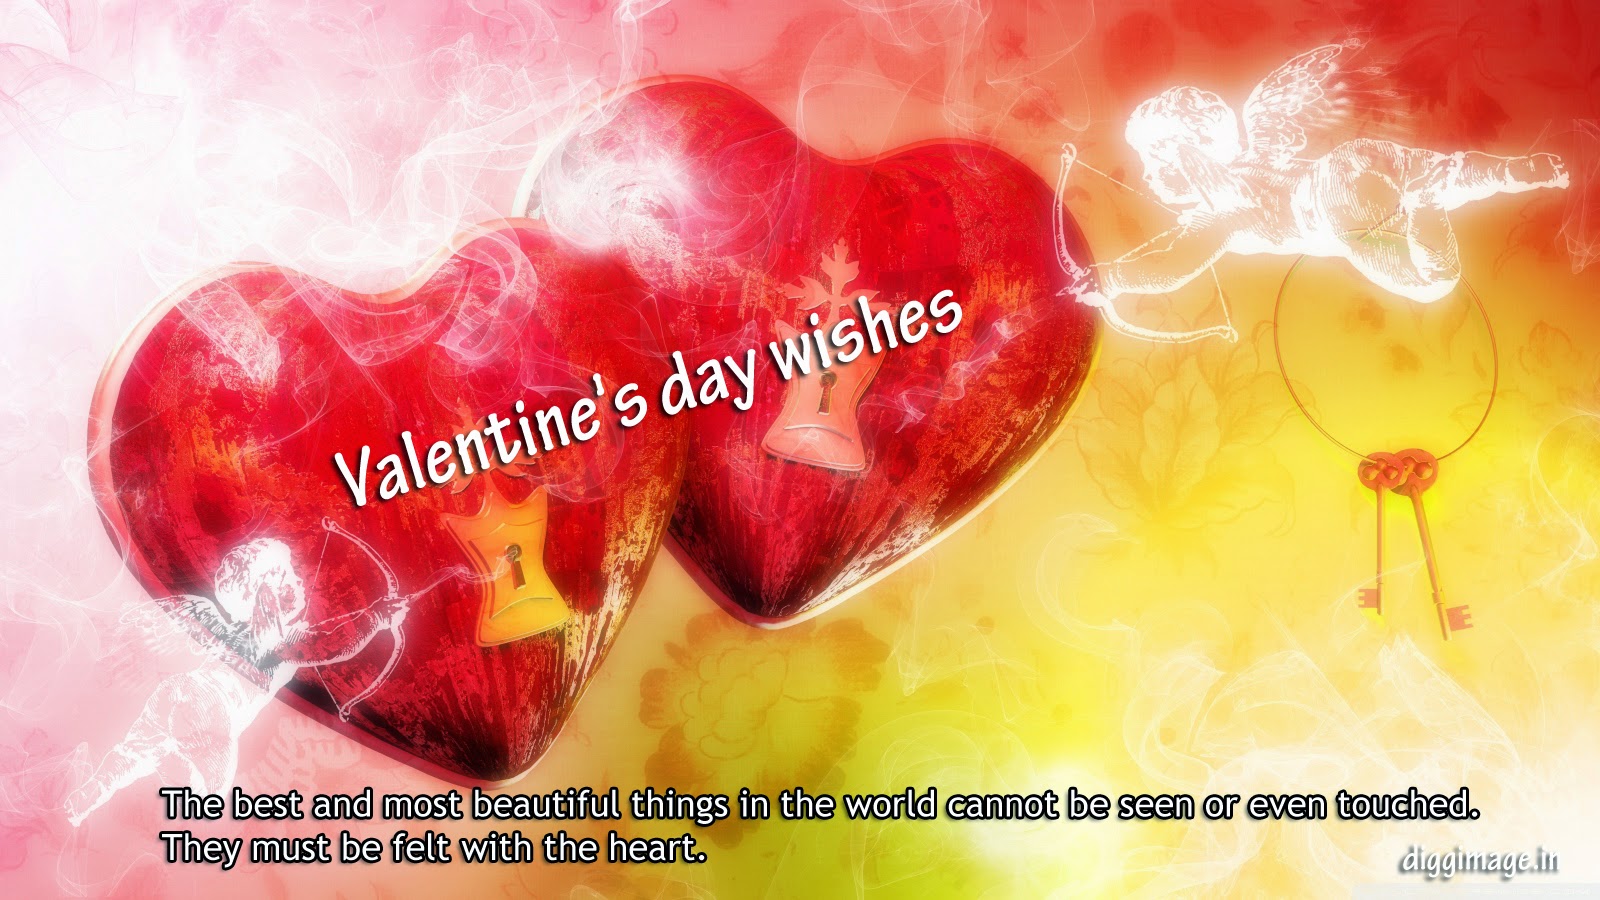 valentine's day wishes, lovely valentine's day wishes, valentine's day wishes for girlfriend, latest happy valentine's day wishes, happy valentine's day wishes 2015, valentine's day greetings, valentine greetings, valentines greetings messages, happy valentines day cards,